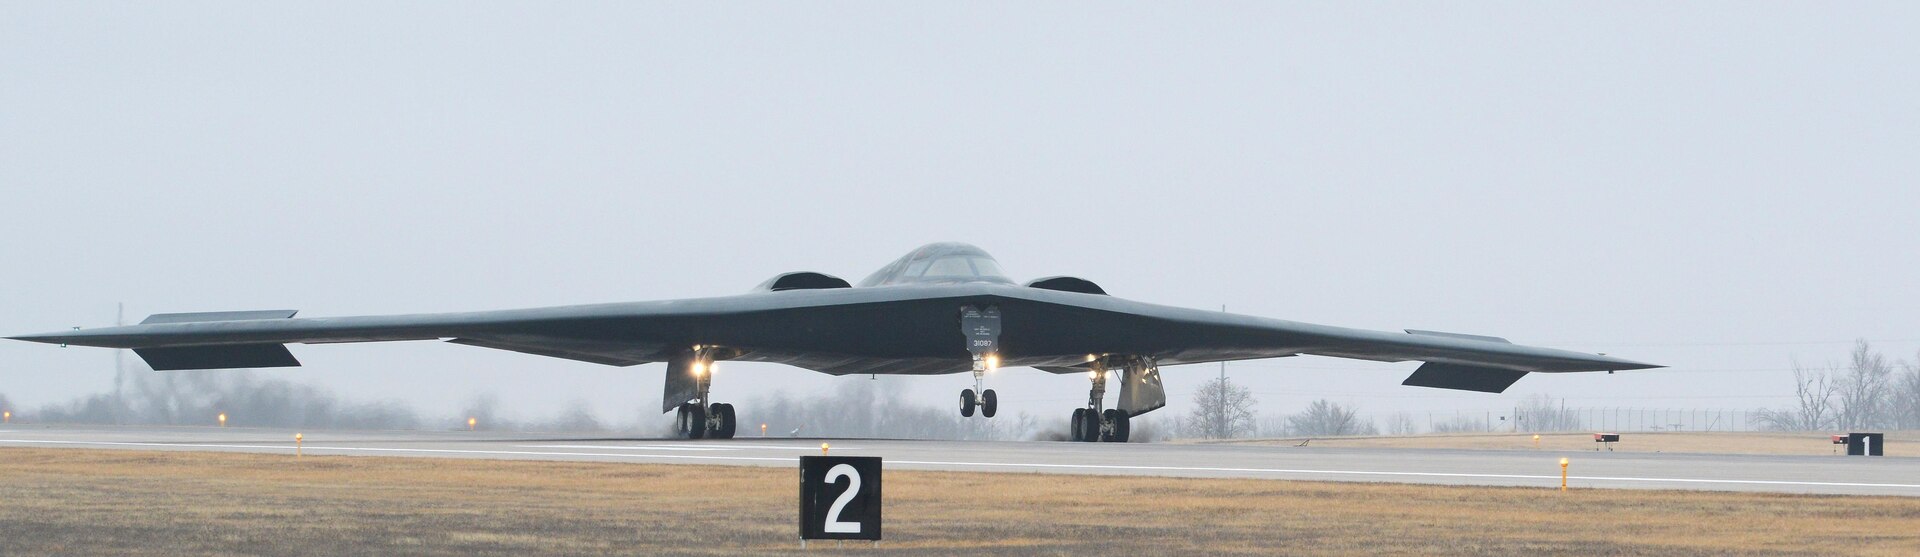 A B-2 Spirit stealth bomber lands at Whiteman Air Force Base, Mo., Jan. 19, 2017. Two B-2s returned after an approximate 30-hour sortie in support of operations near Sirte, Libya. In conjunction with the Libyan Government of National Accord, the U.S. military conducted precision airstrikes Jan. 18, 2017, destroying two Daesh camps 45 kilometers southwest of Sirte. (U.S. Air Force photo by Senior Airman Joel Pfiester)